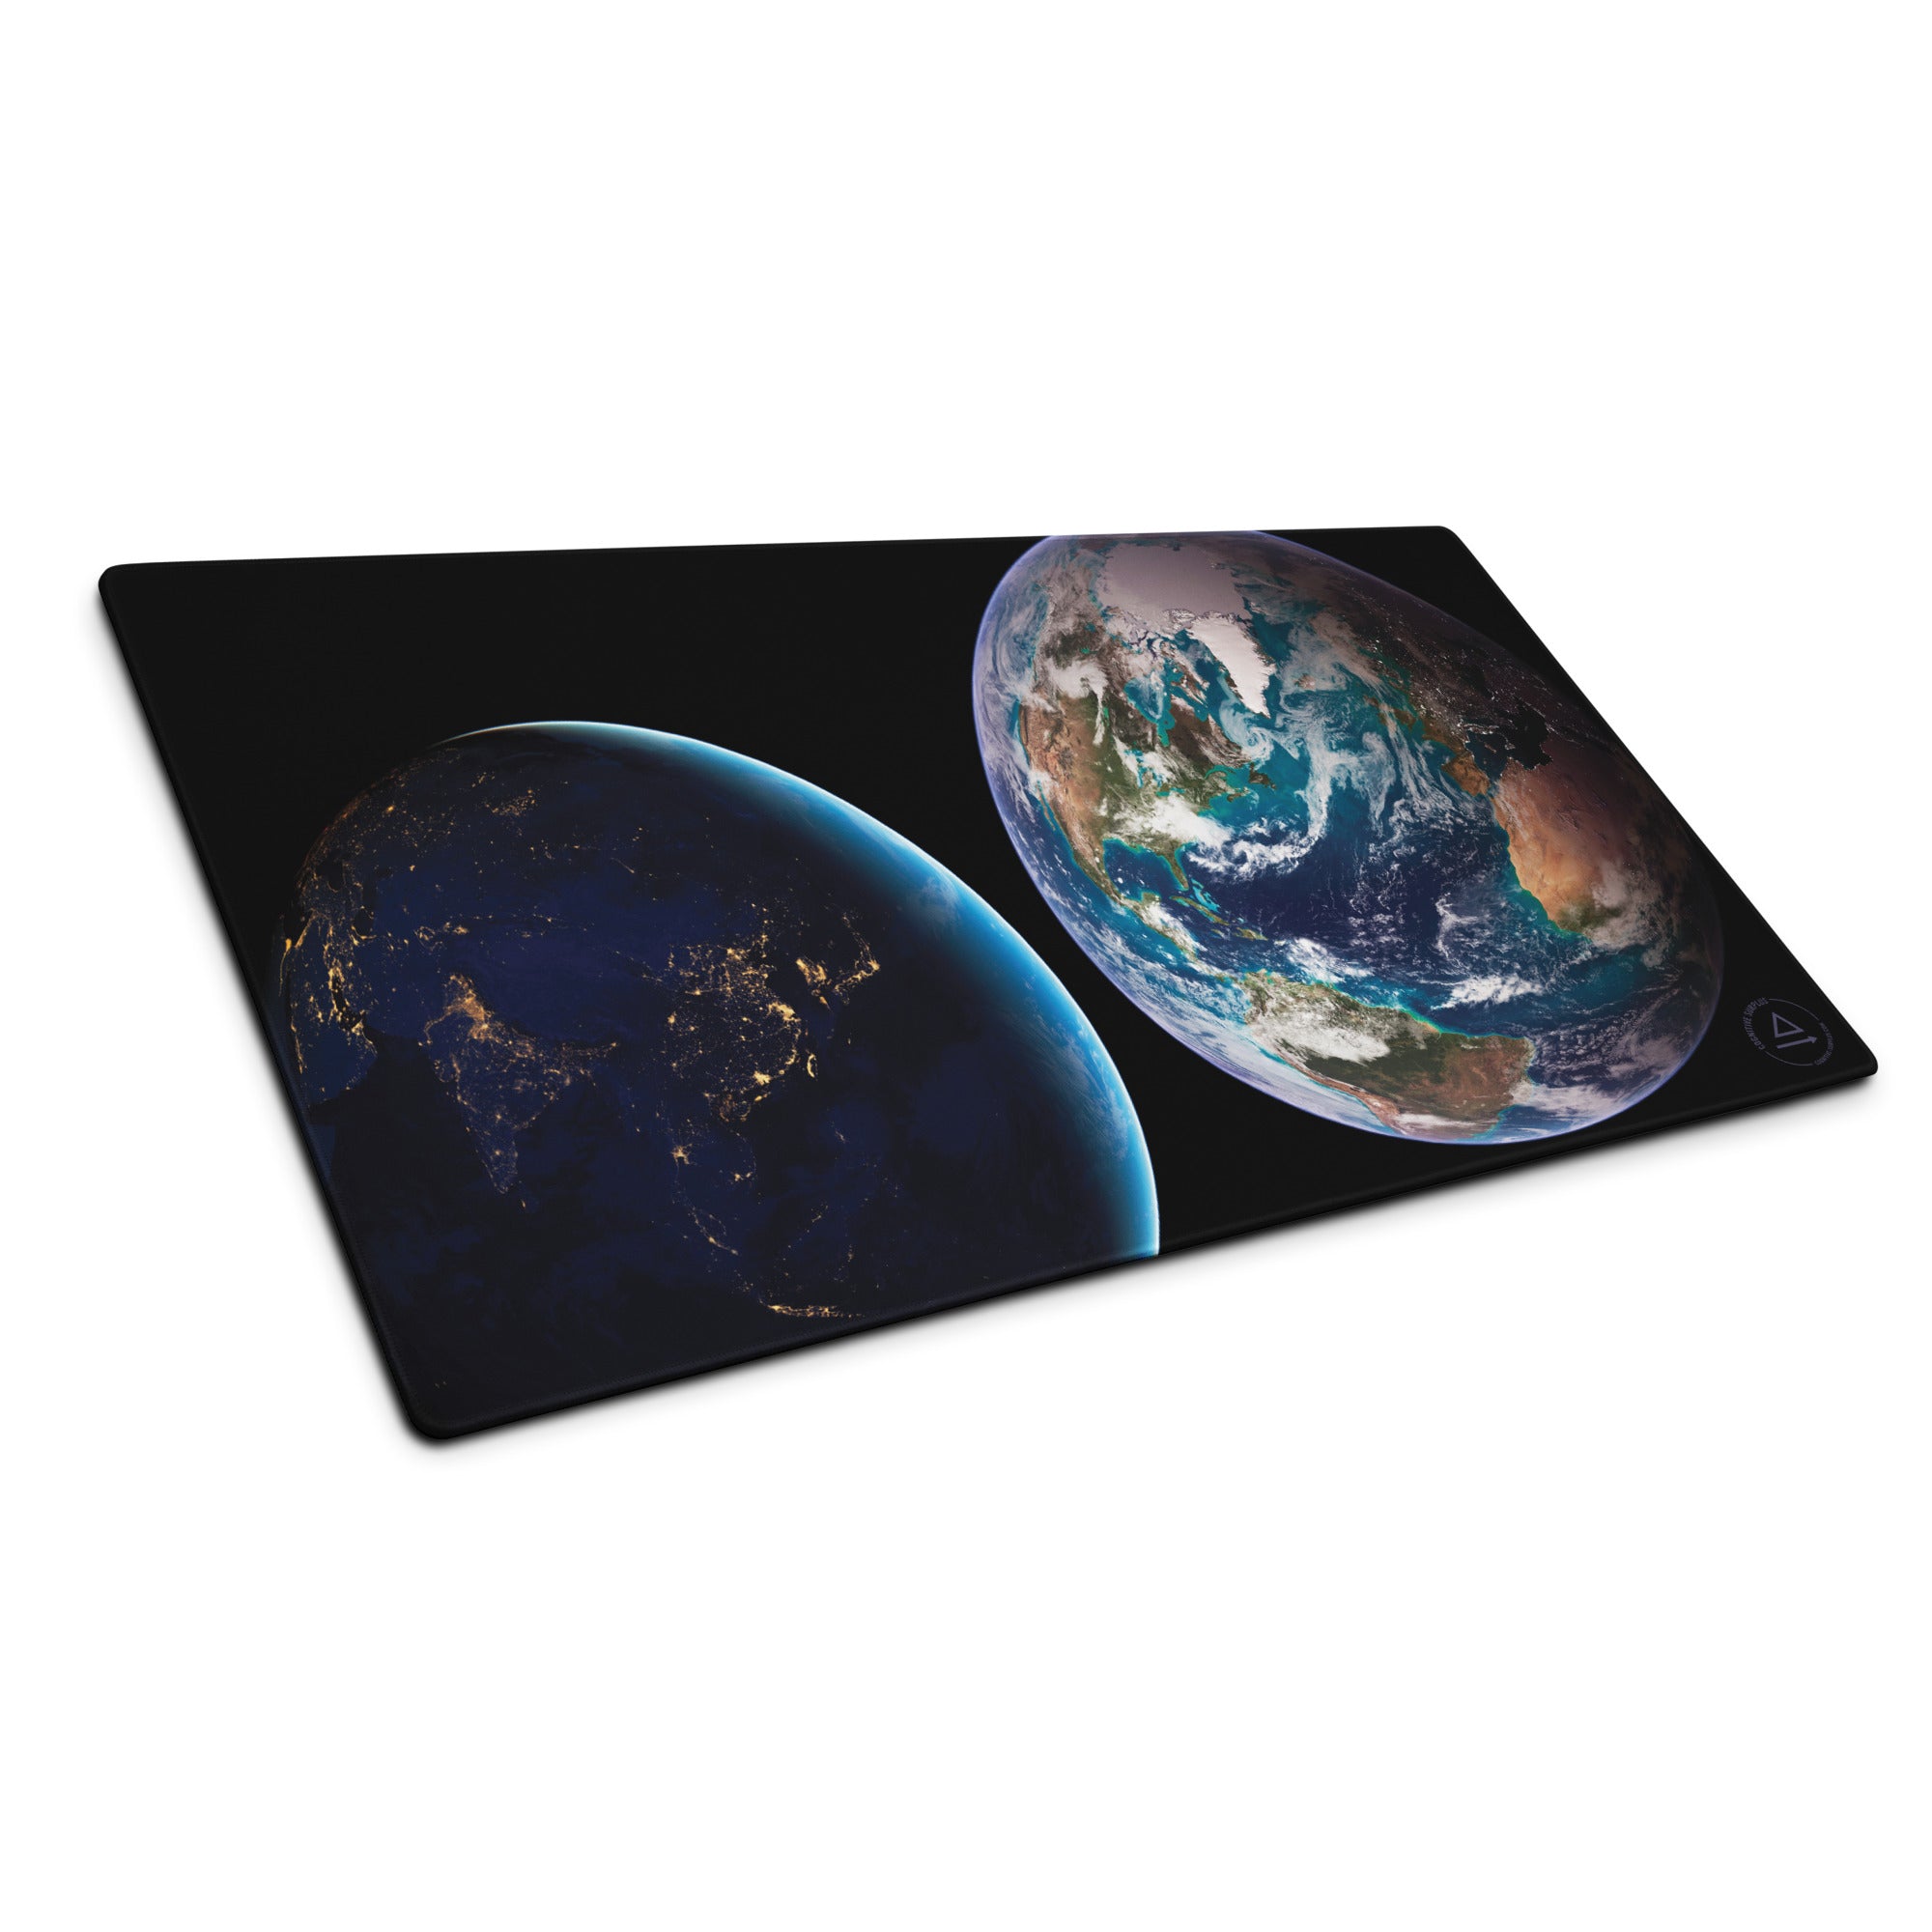 gaming-mouse-pad-white-36x18-front-6570fd06a860e.jpg